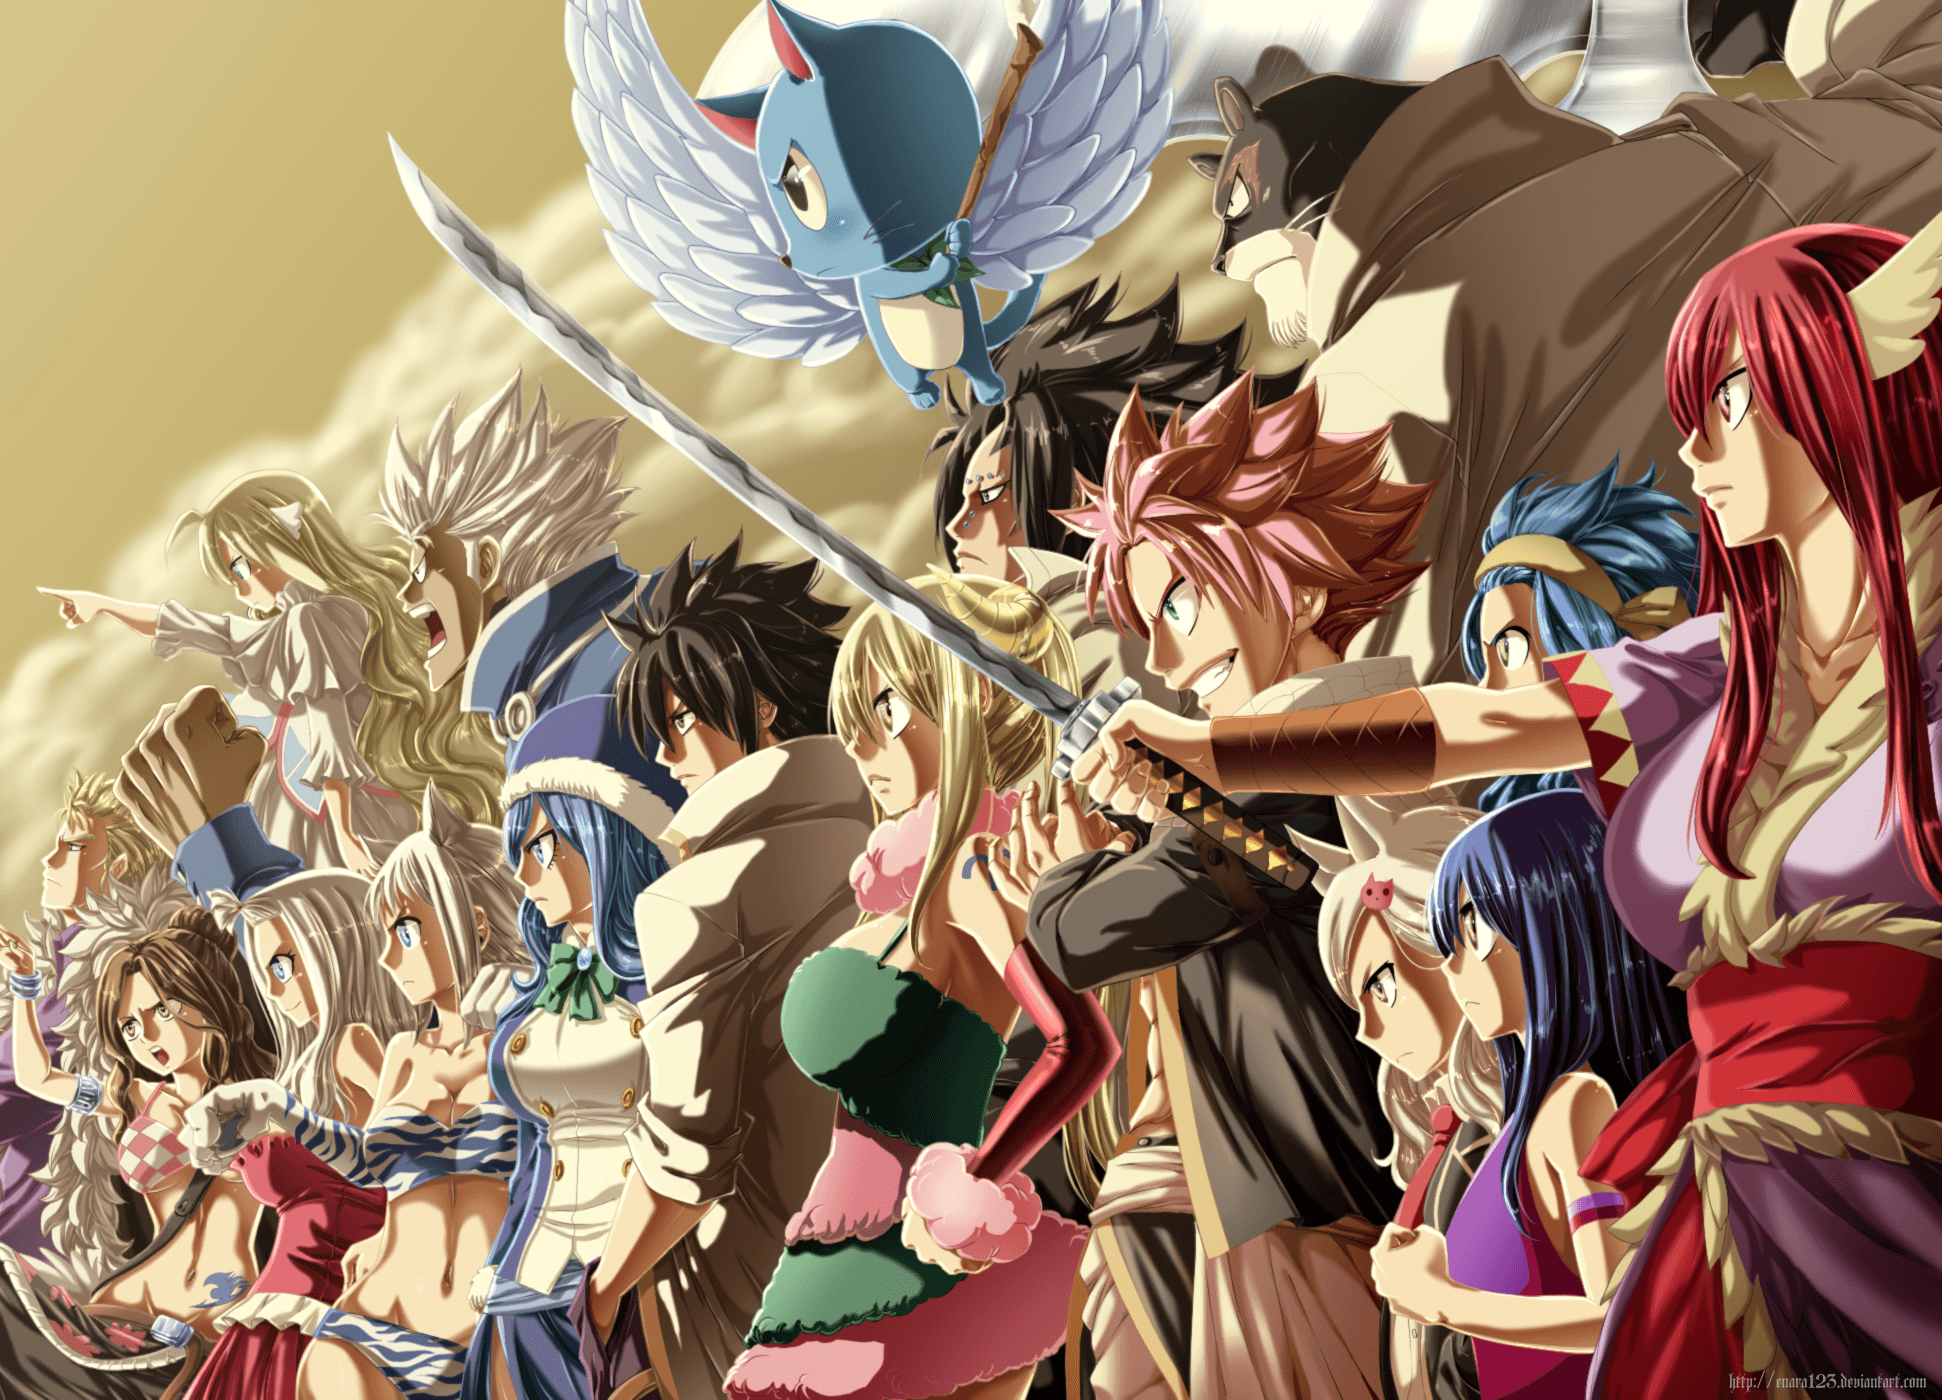 View, download, comment, and rate this 1942x1400 Fairy Tail